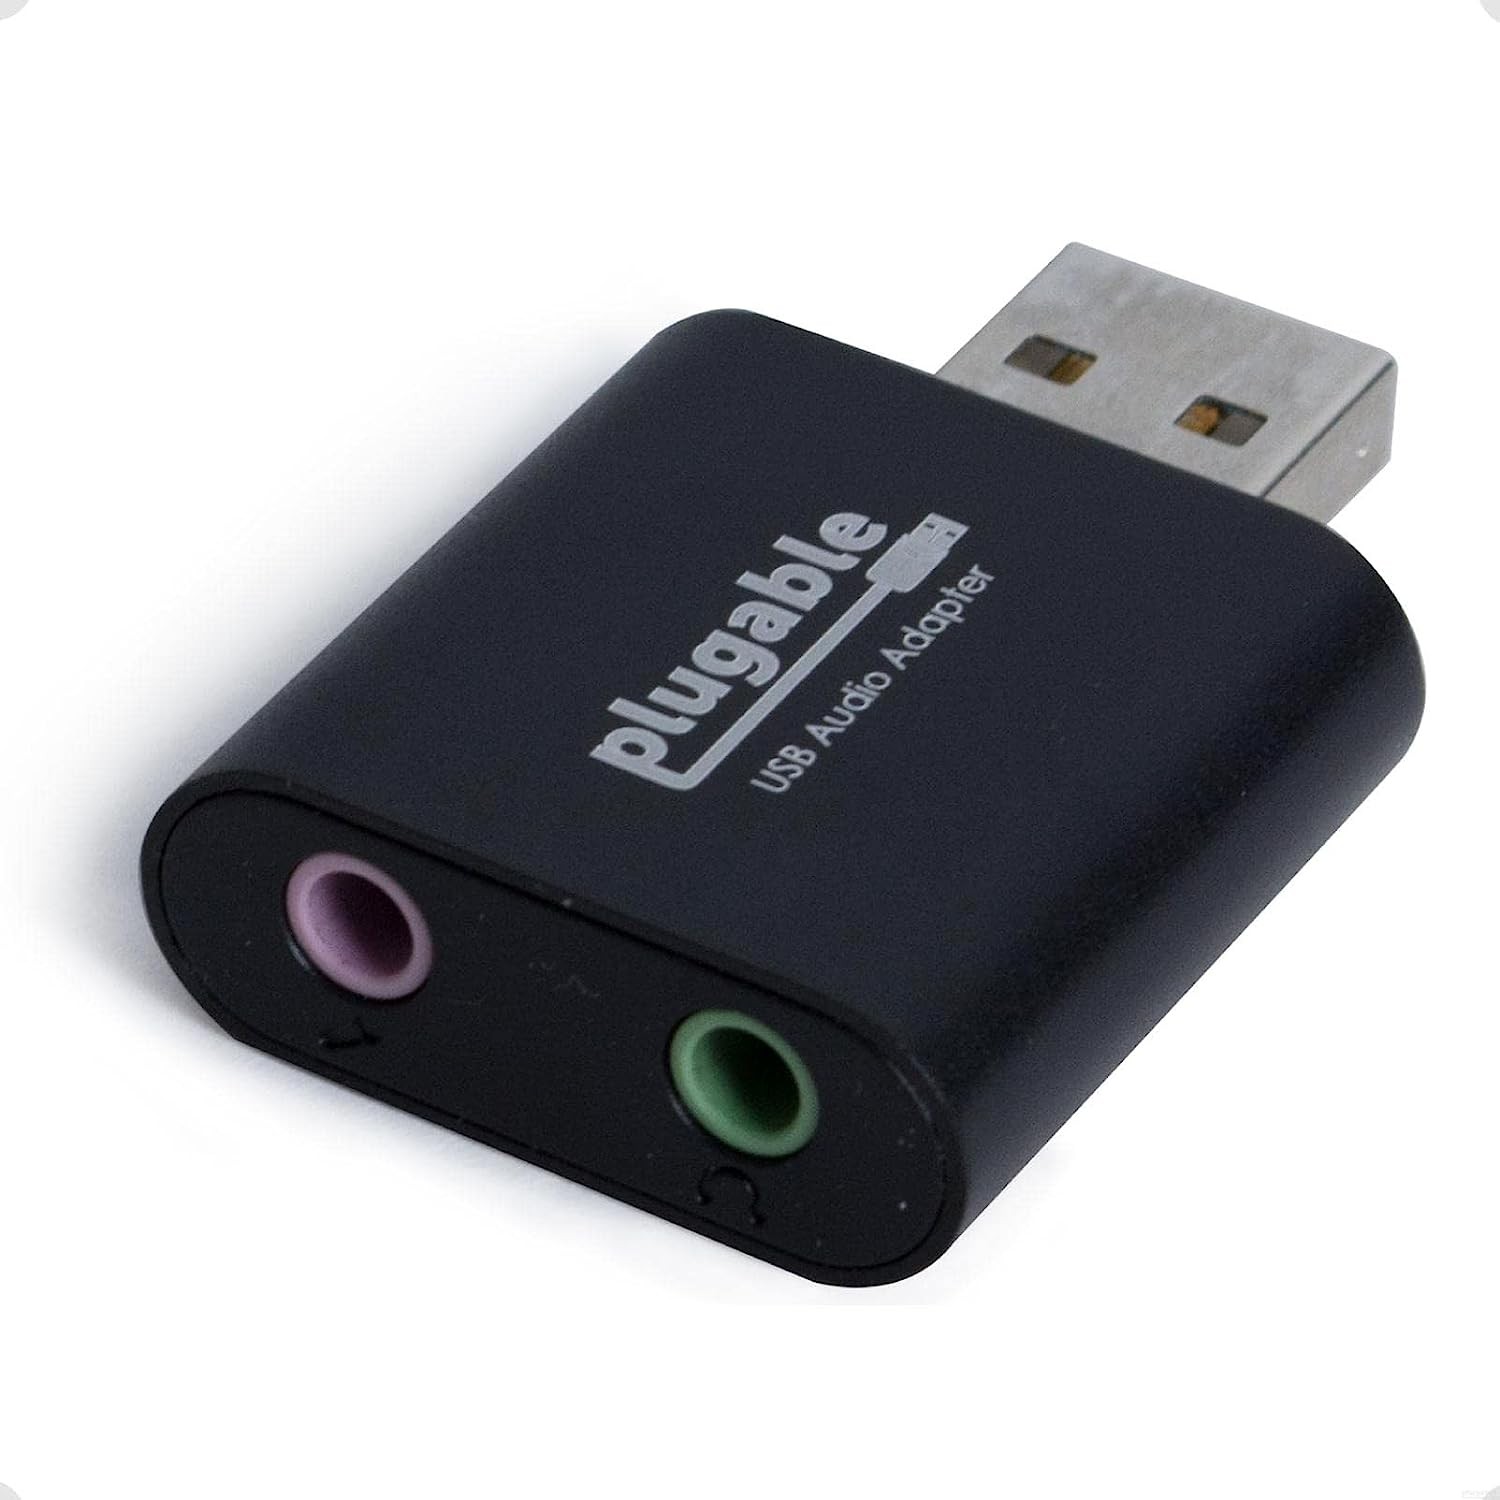 Plugable USB Audio Adapter with 3.5Mm Speaker-Headphone and Microphone  Jack, Add an External Stereo Sound Card to Any PC, Compatible with Windows,  Mac, and Linux - Driverless